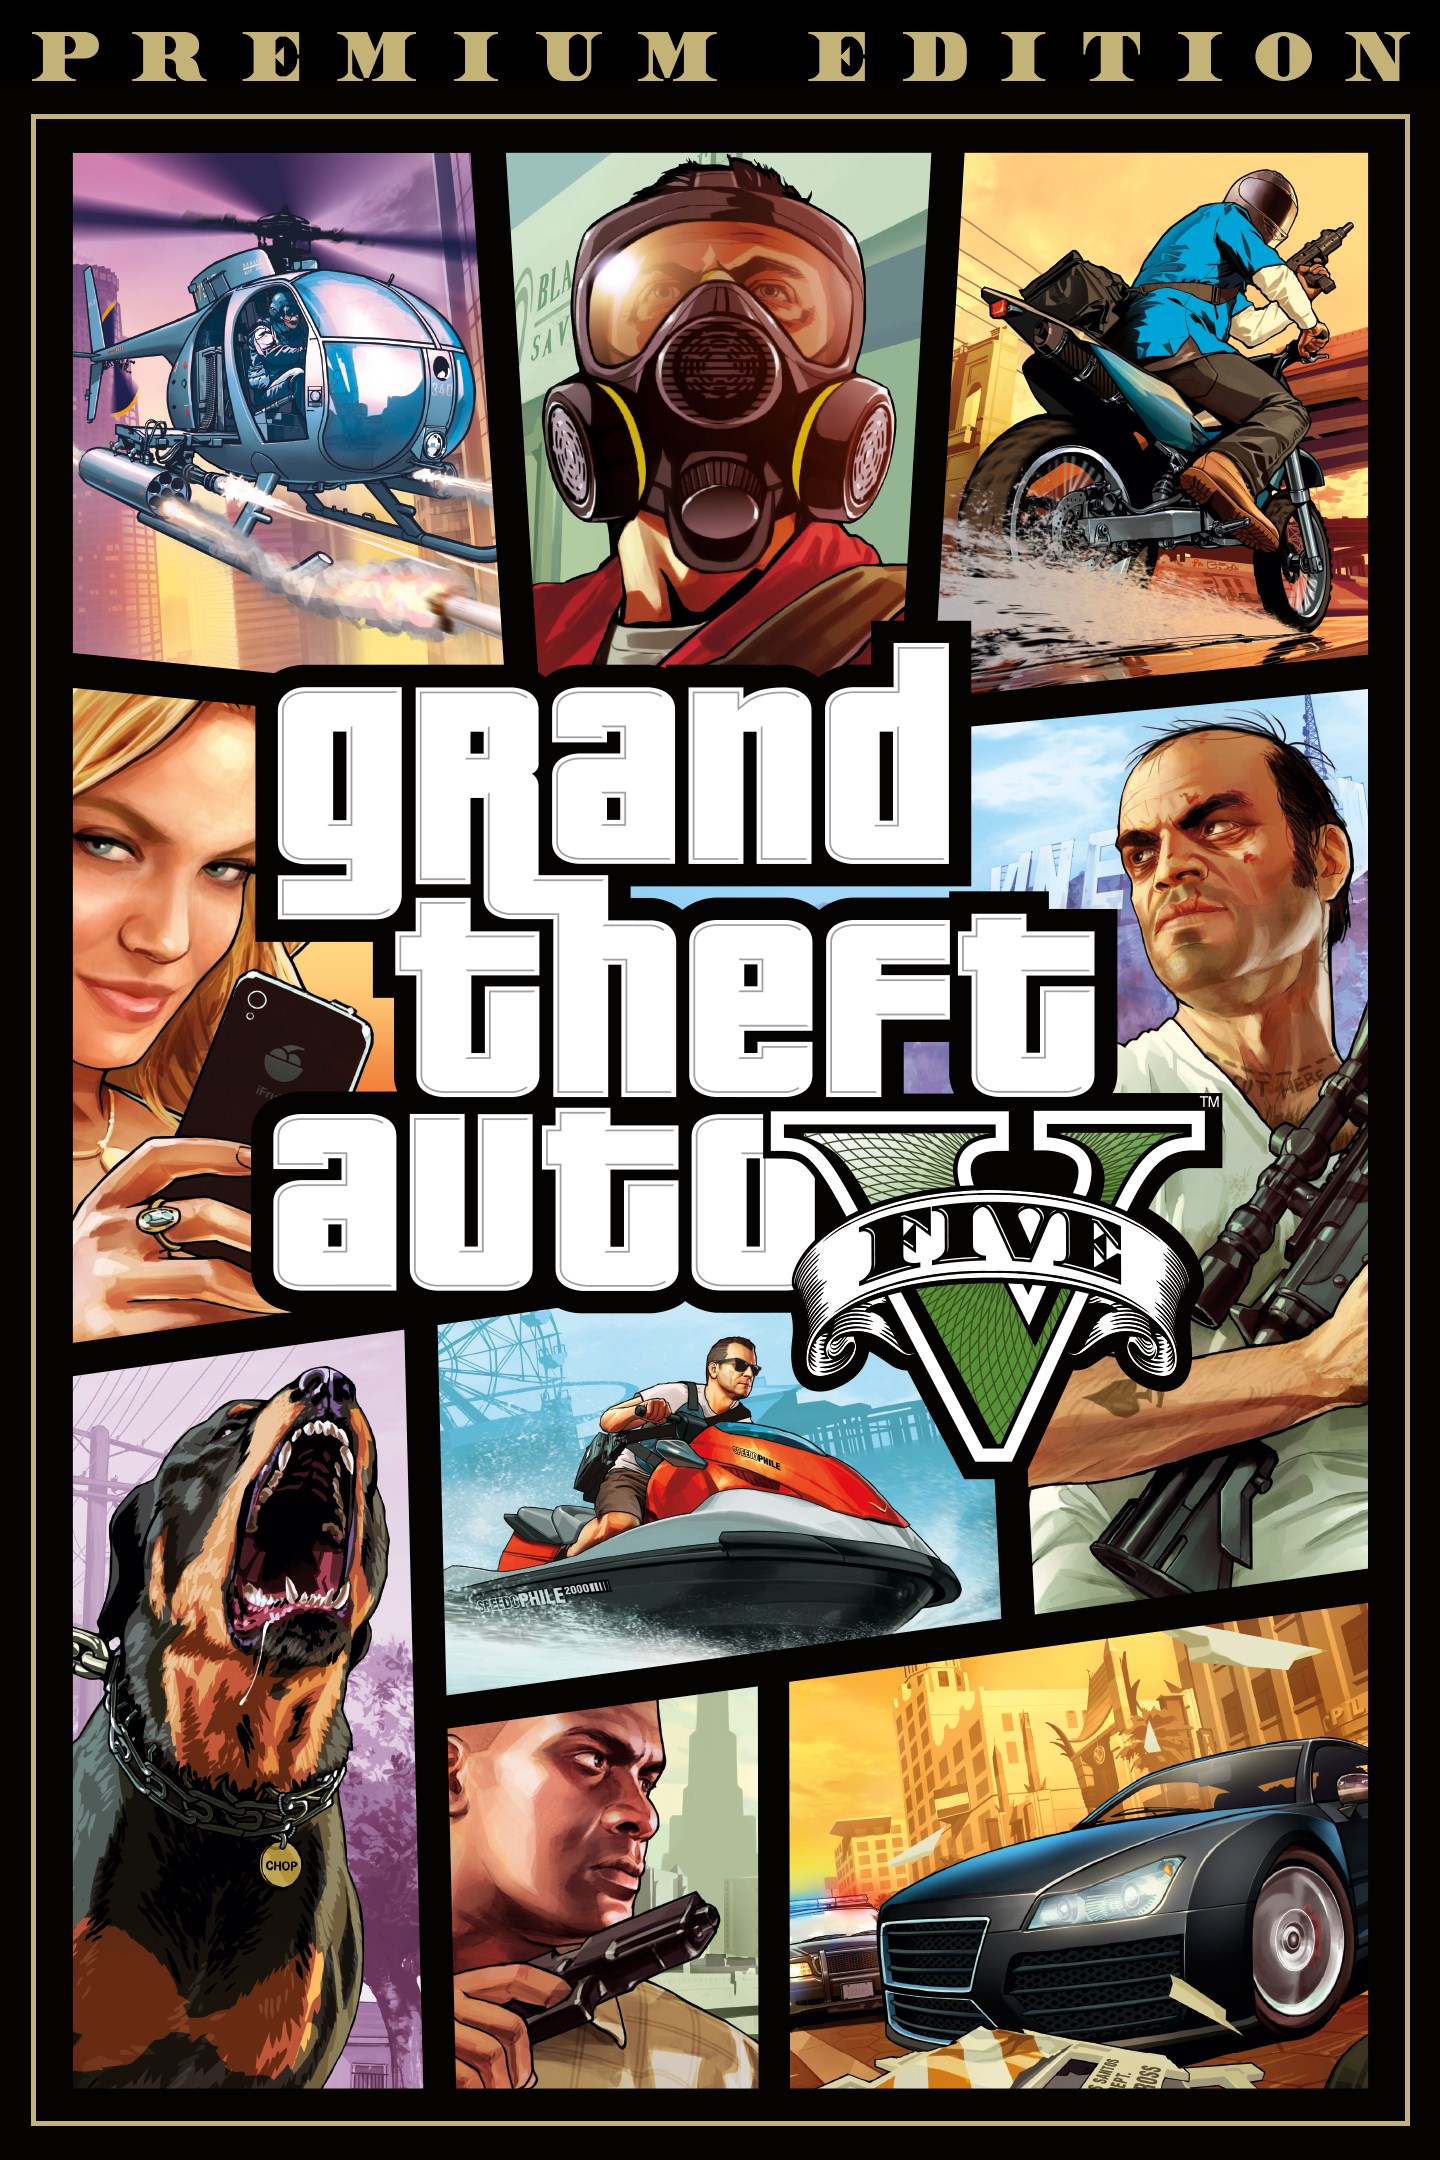 Grand theft auto v free download free pdf file reader for windows 10